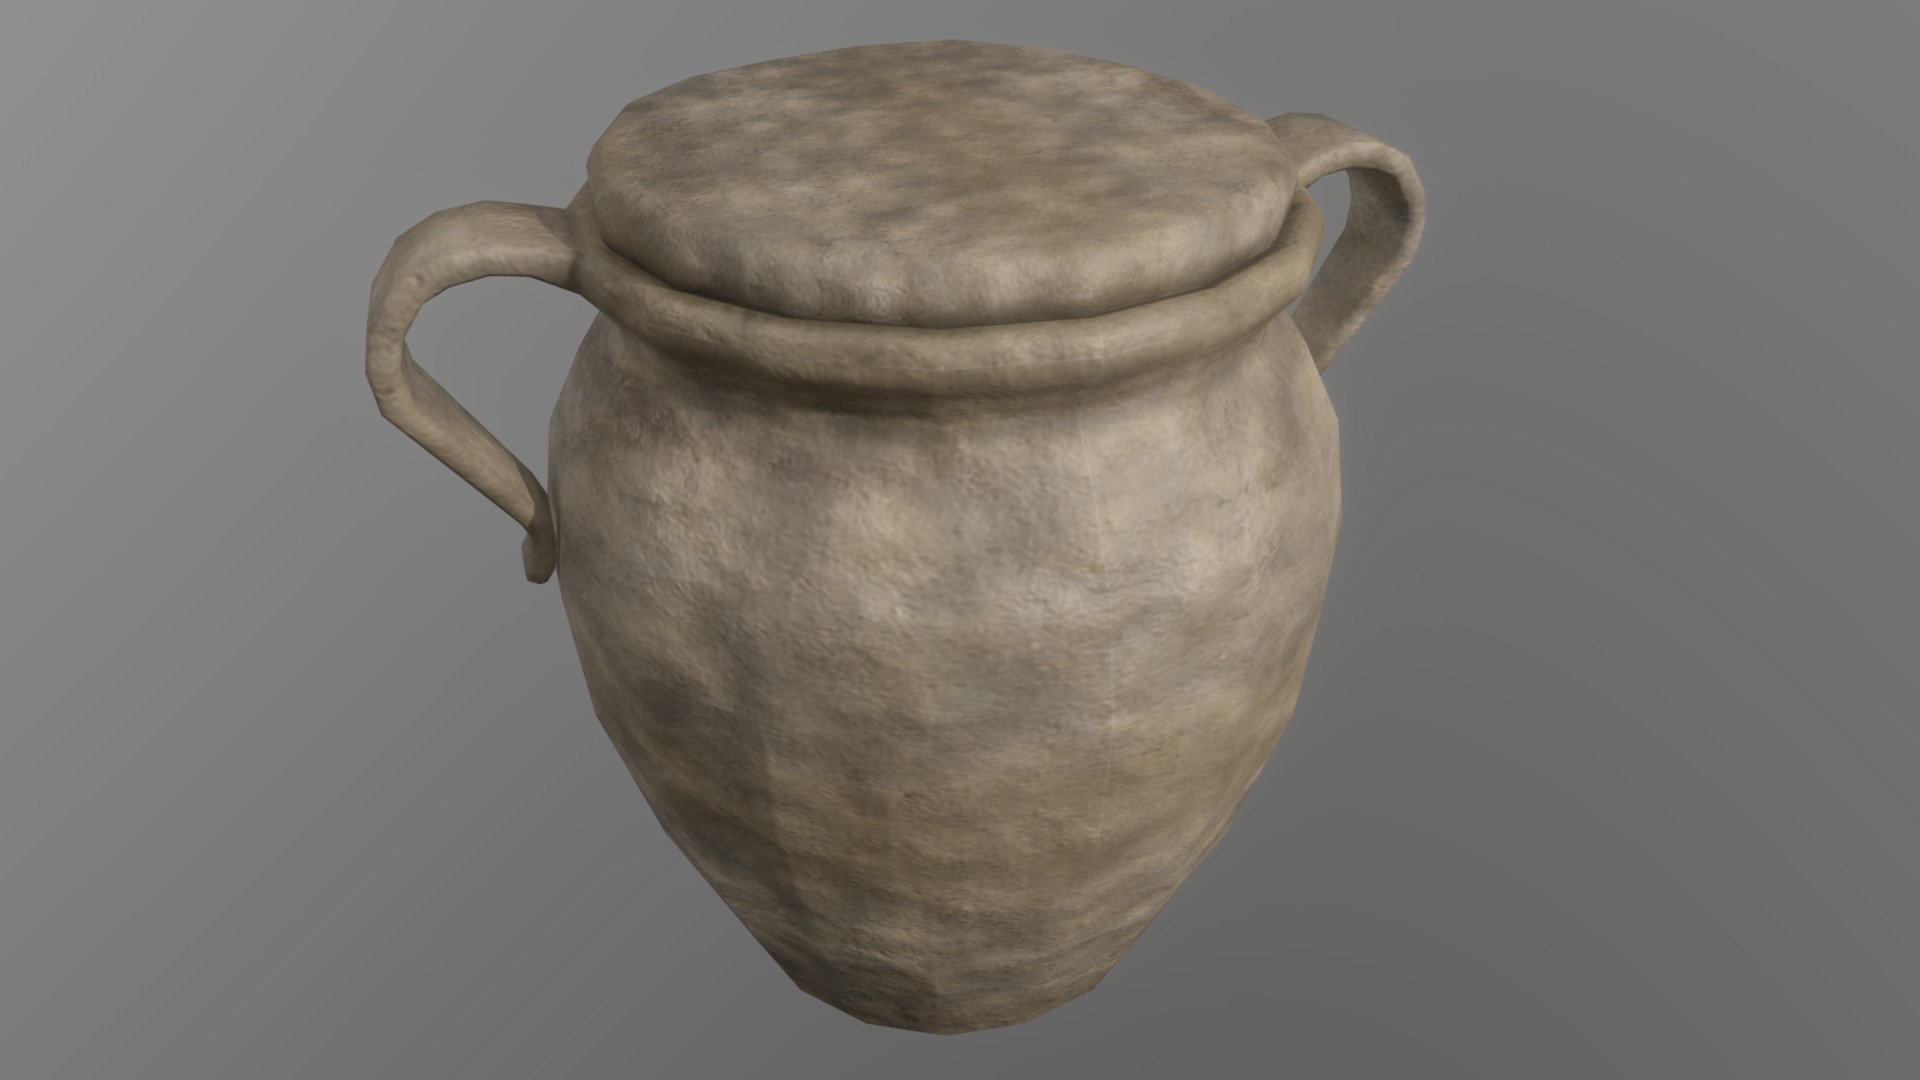 Clay Pot 4 (Viking)
Bring your 3D model of a clay pot to life with this  low-poly design. Perfect for use in games, animations, VR, AR, and more, this model is optimized for performance and still retains a high level of detail.


Features



low poly design with 708 vertices

1,448 edges

744 faces (polygons)

1,408 tris

2k PBR Textures and materials

File formats included: .obj, .fbx, .dae


Tools Used
This Clay Pot 3D model was created using Blender 3.3.1, a popular and versatile 3D creation software.


Availability
This low-poly Clay Pot 3D model is ready for use and available for purchase. Bring your project to the next level with this high-quality and optimized model 3d model